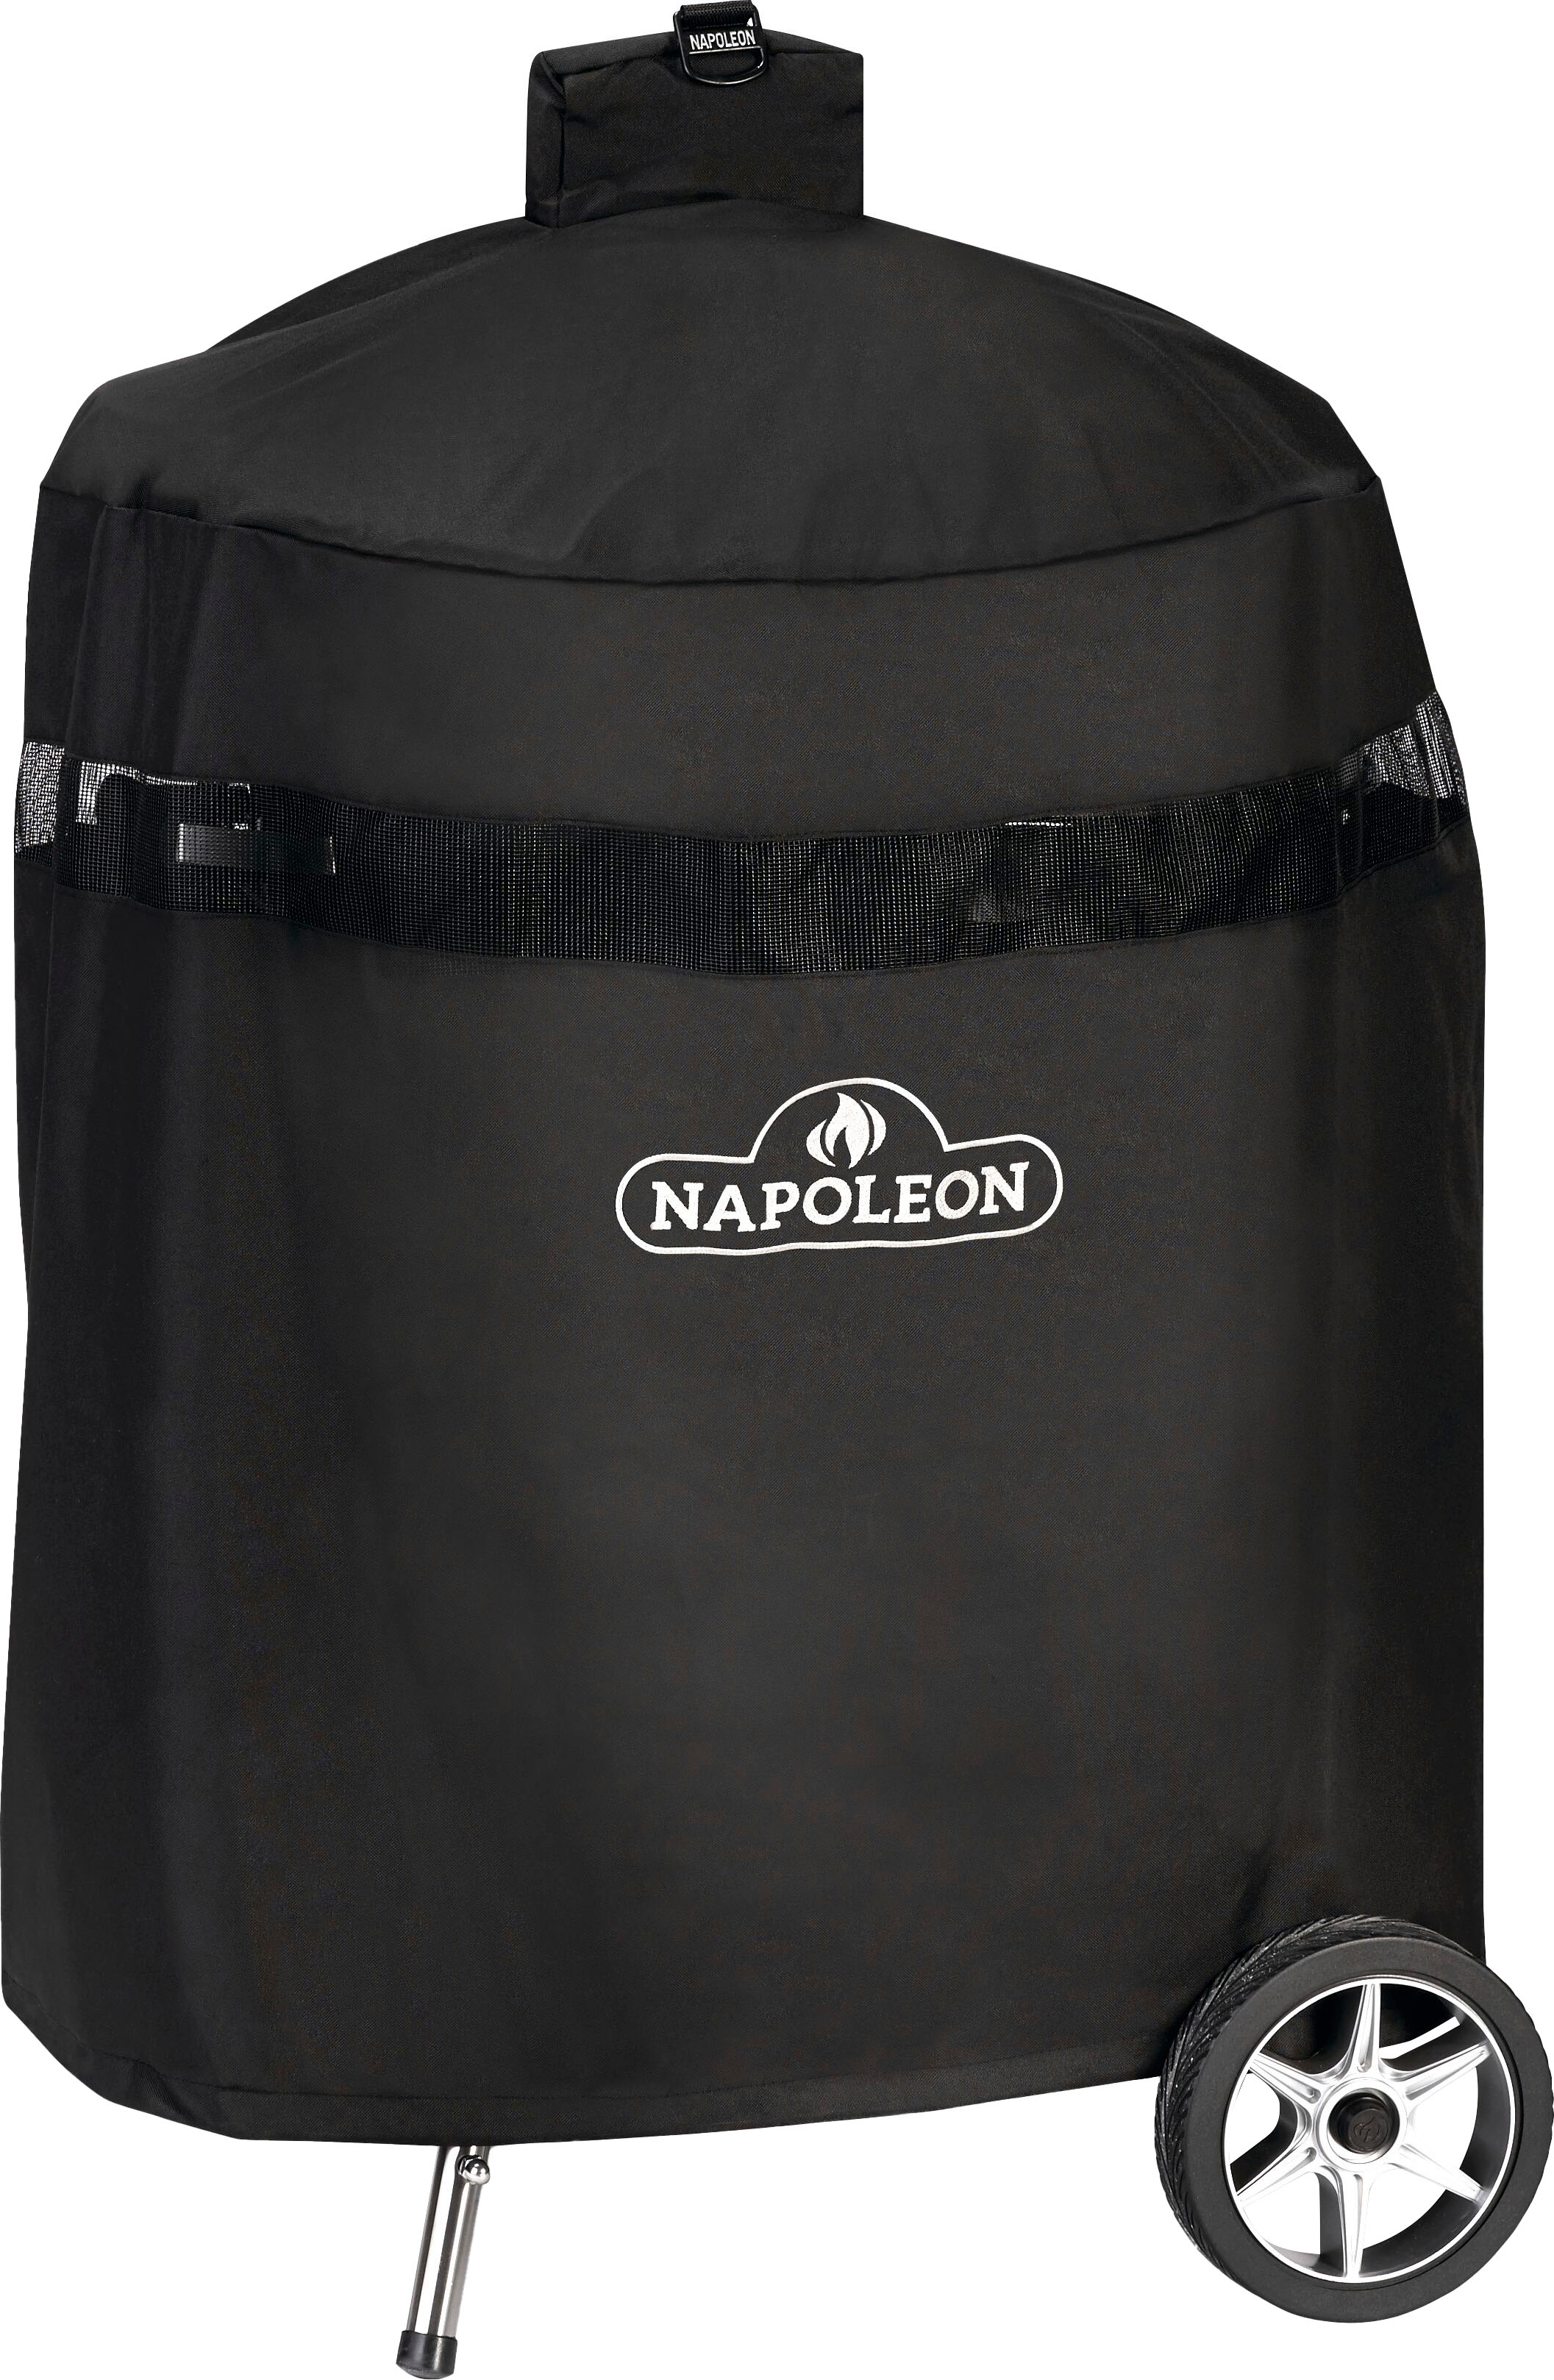 

Napoleon - 22" Charcoal Kettle Grill with Legs Premium Cover - Black